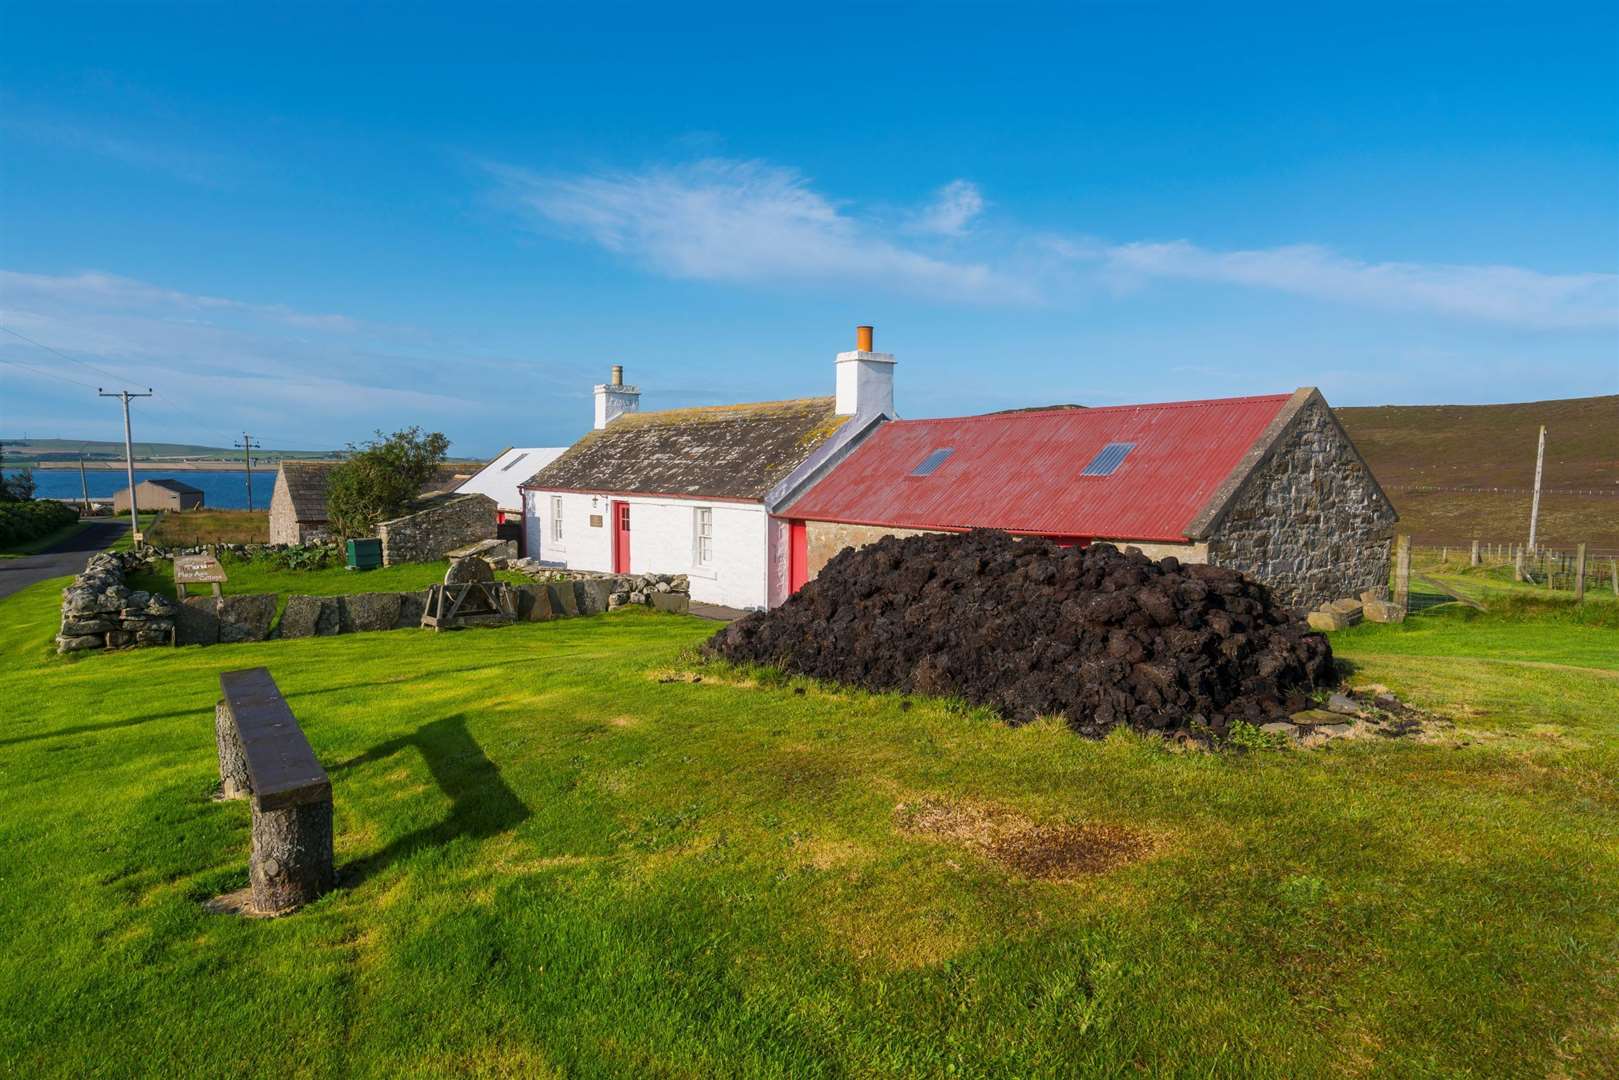 Mary-Ann’s Cottage, Dunnet, Caithness. Picture: VisitScotland/Kenny Lam